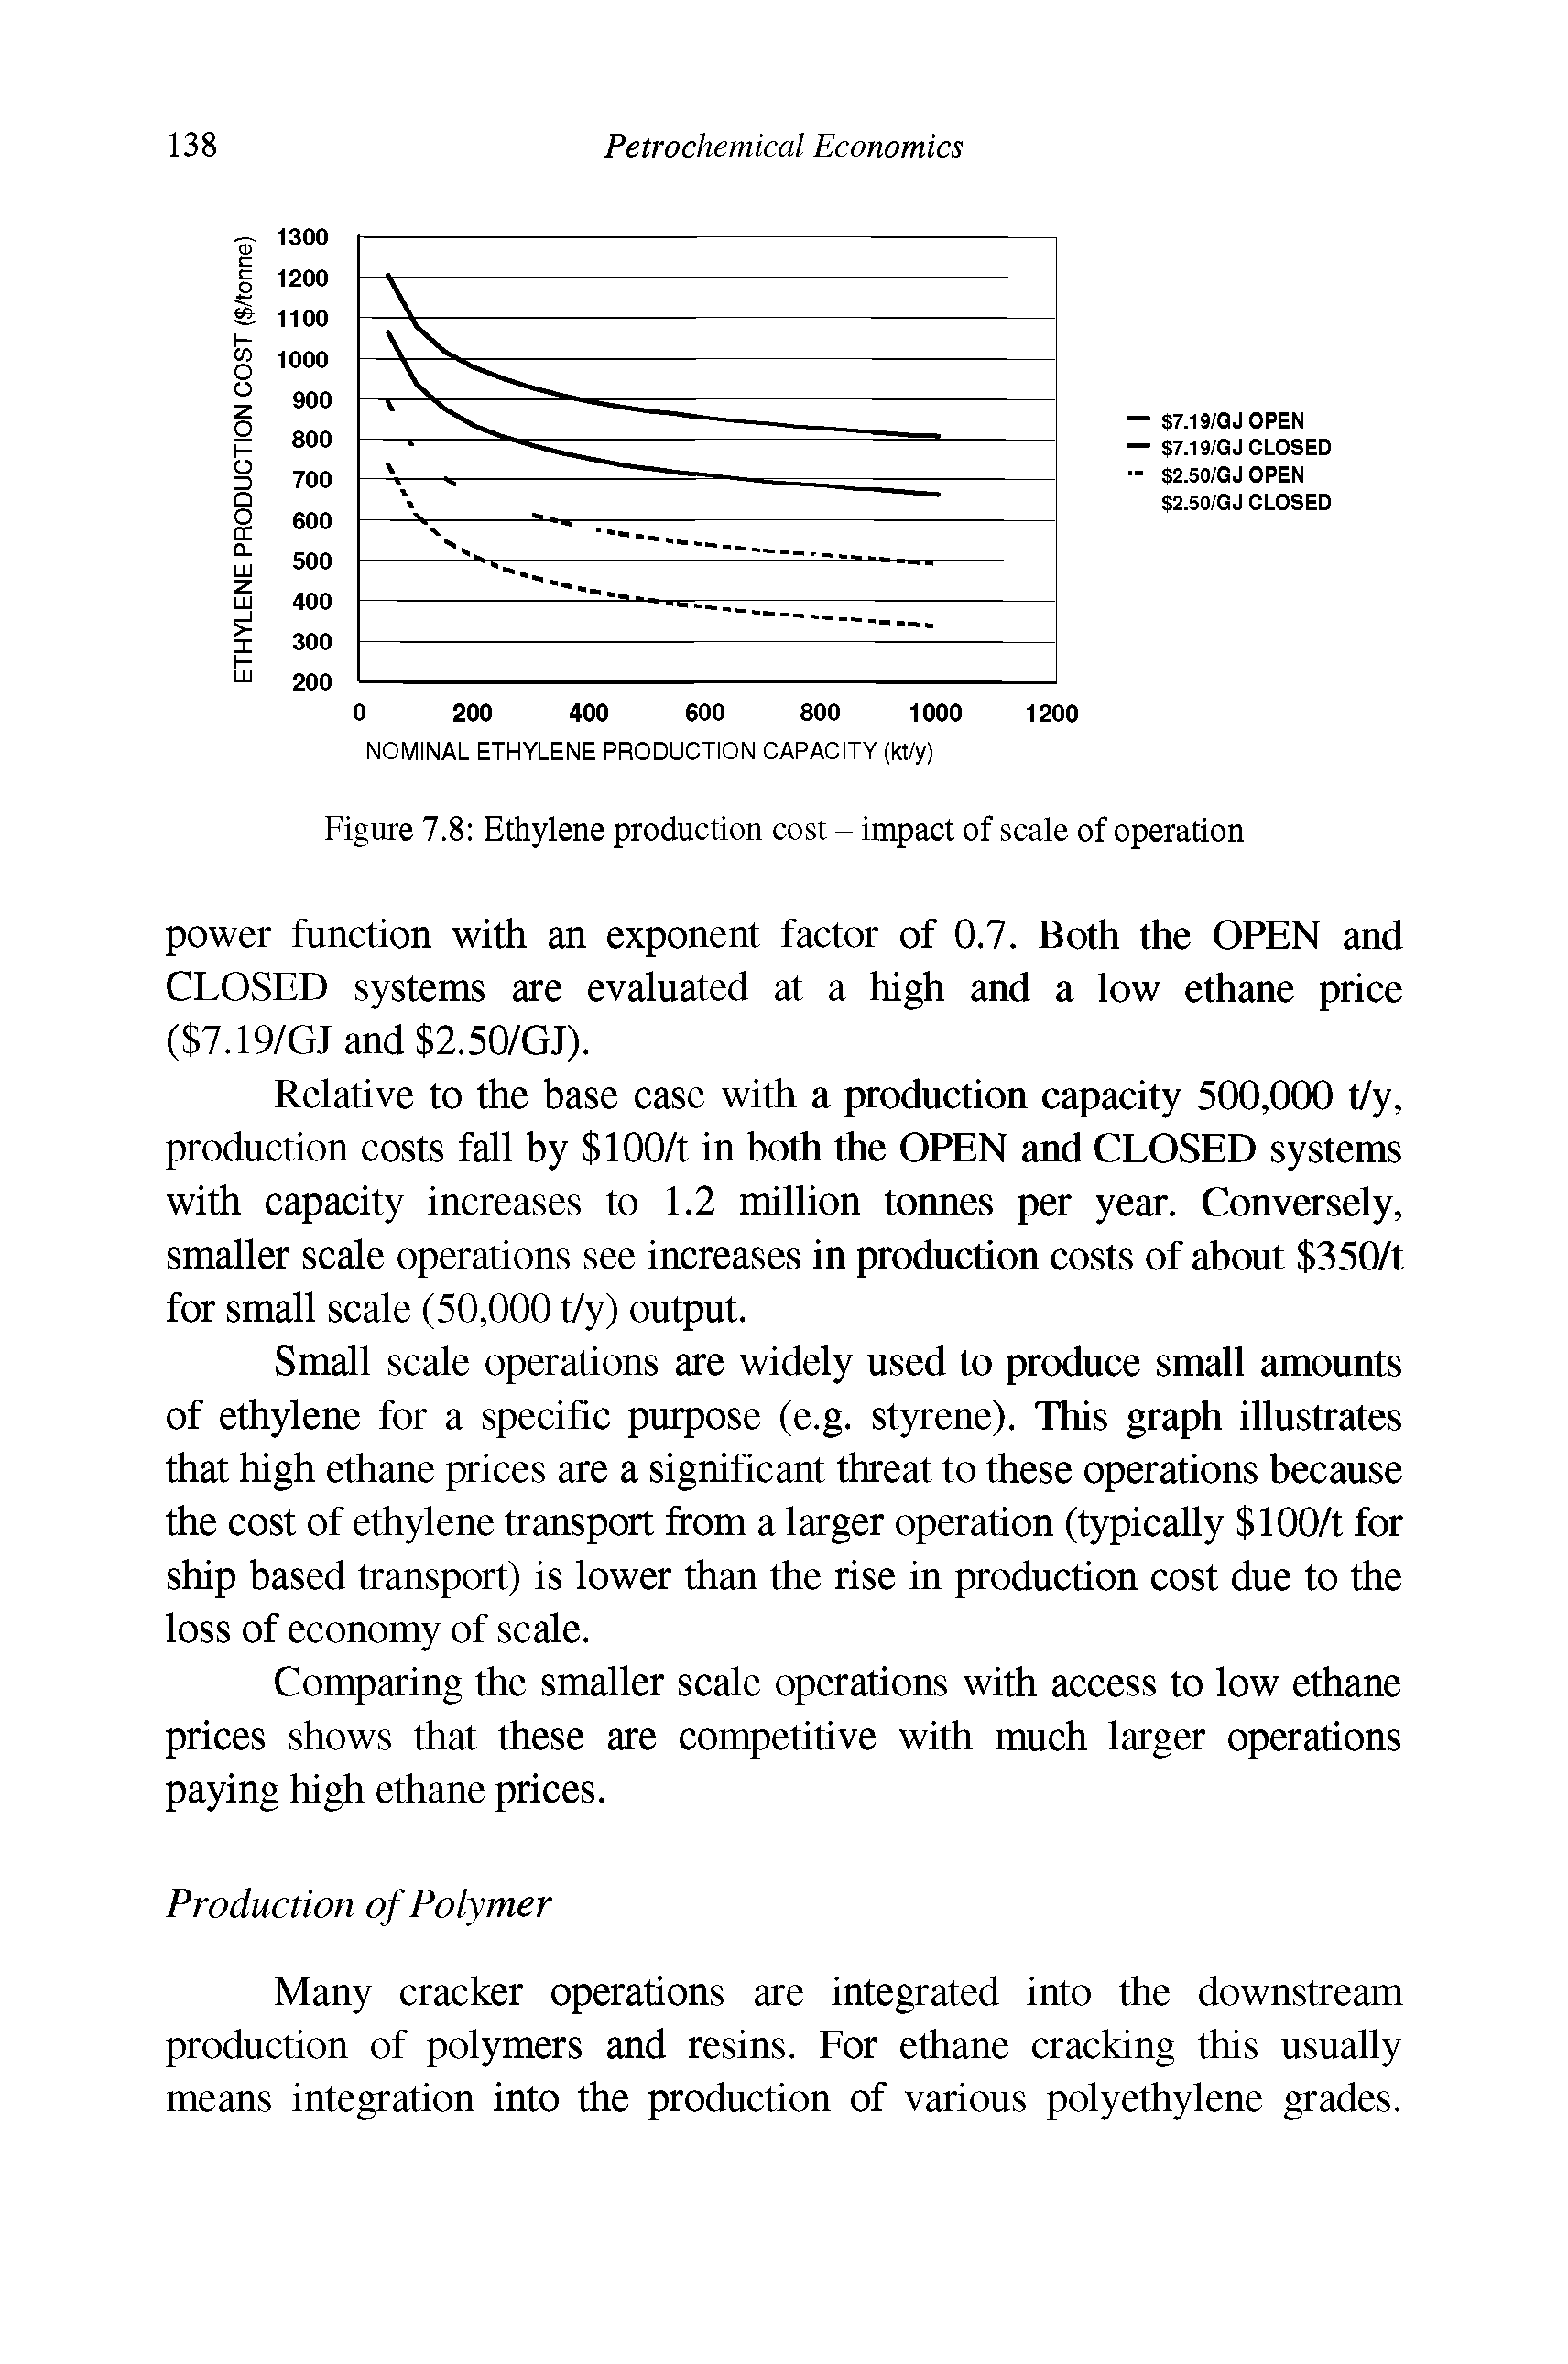 Figure 7.8 Ethylene production cost - impact of scale of operation...